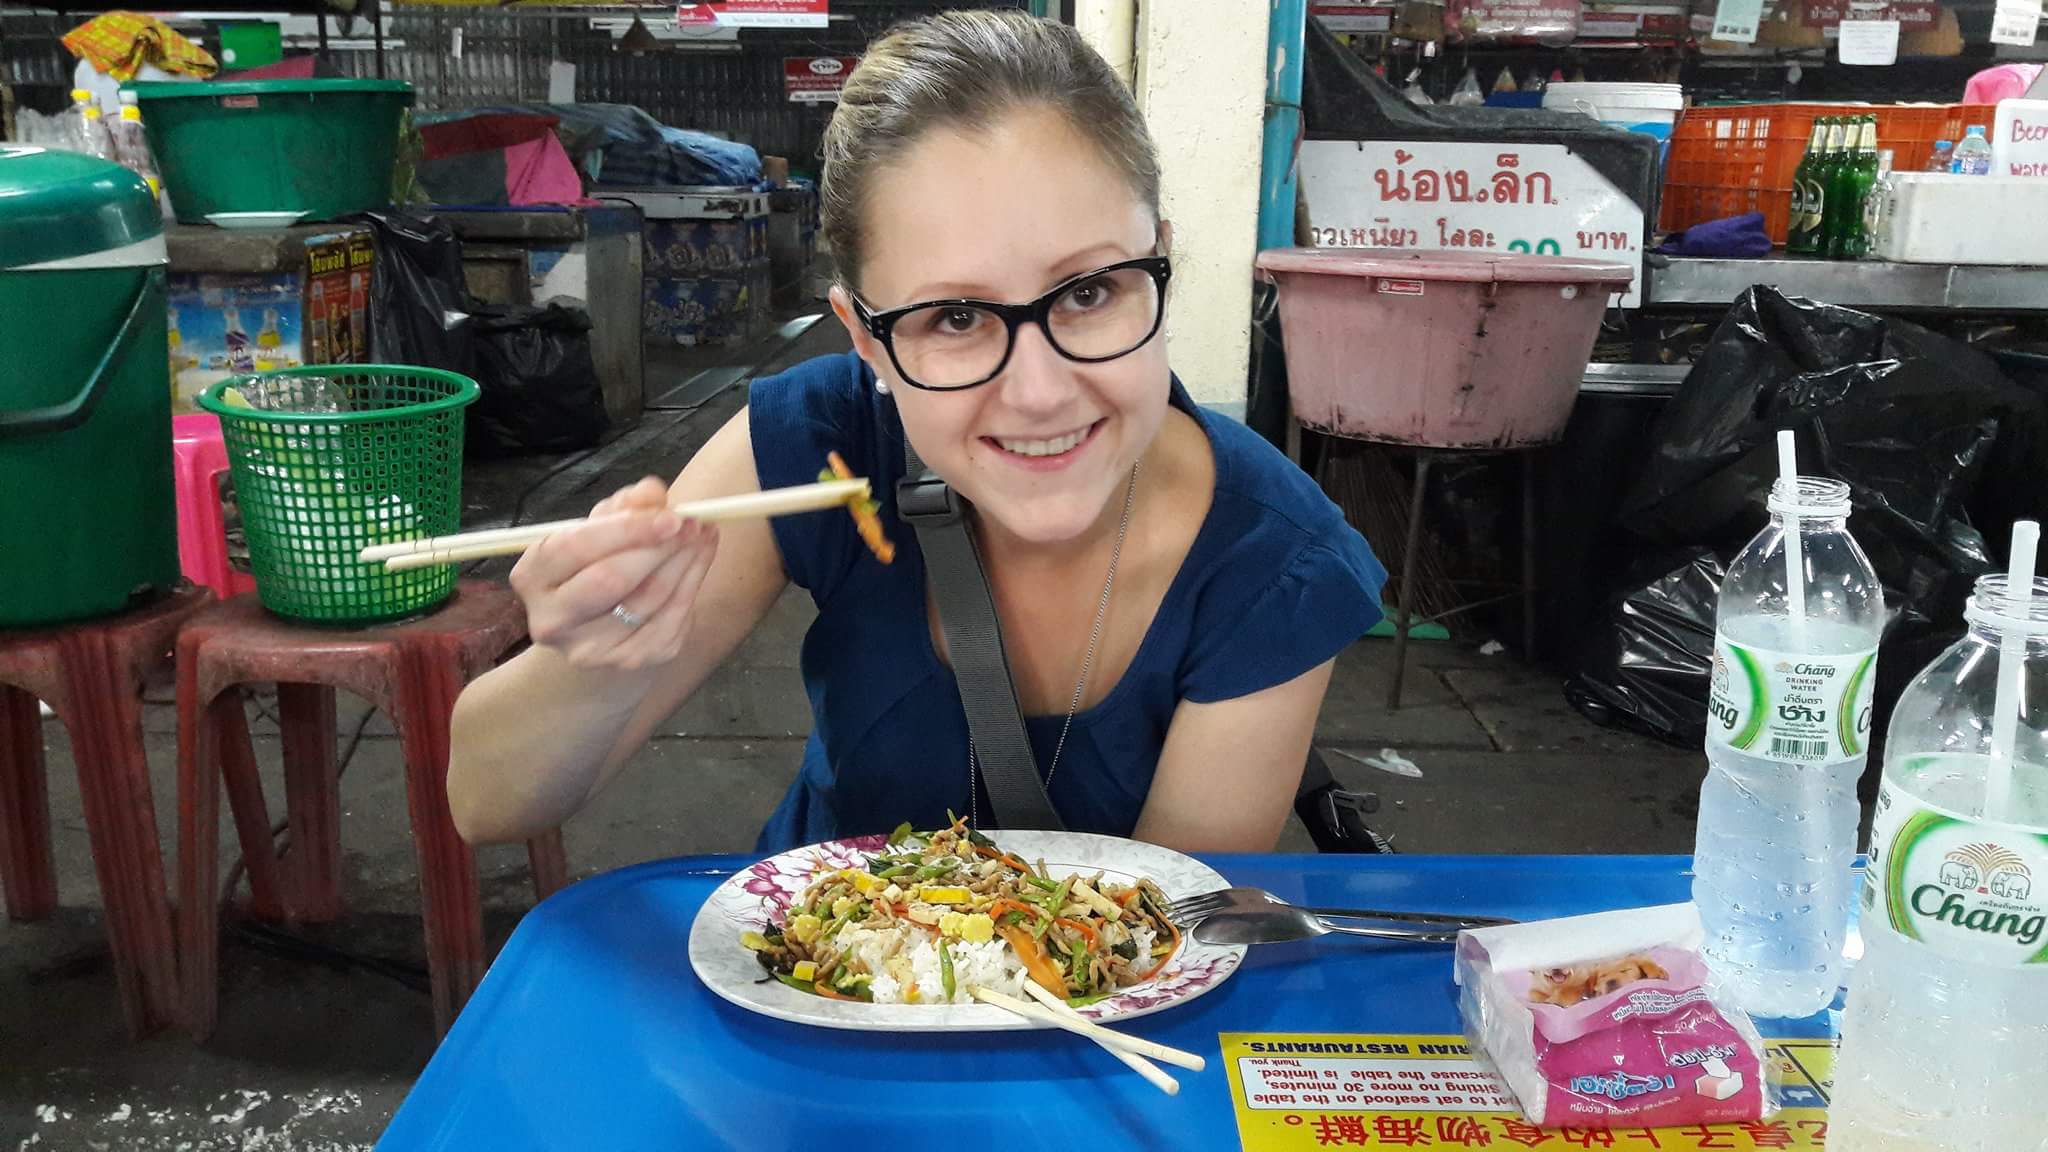 Woman enjoying Streetfood in Chiang Mai, Thailand on a table